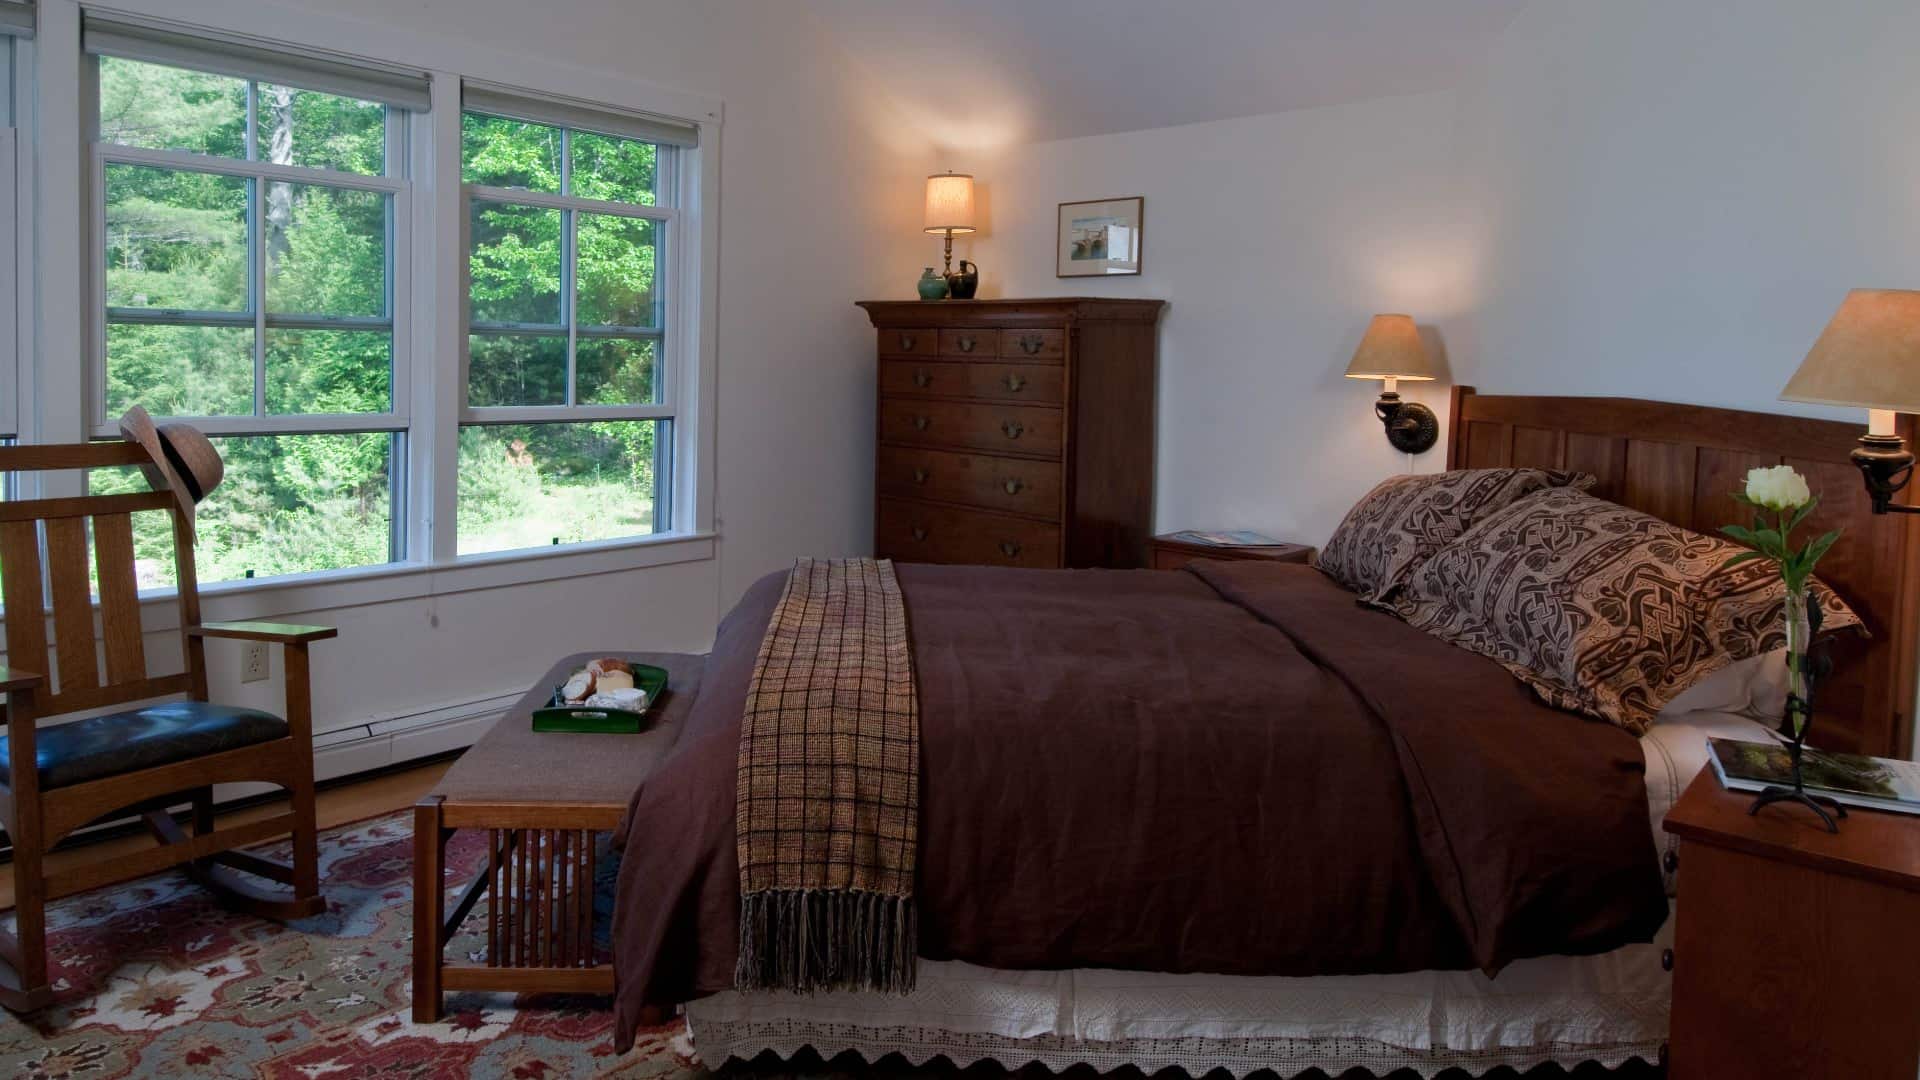 Bedroom with craftsman-style furniture, bed made up in cozy brown comforter with a colorful rug on wooden floor.